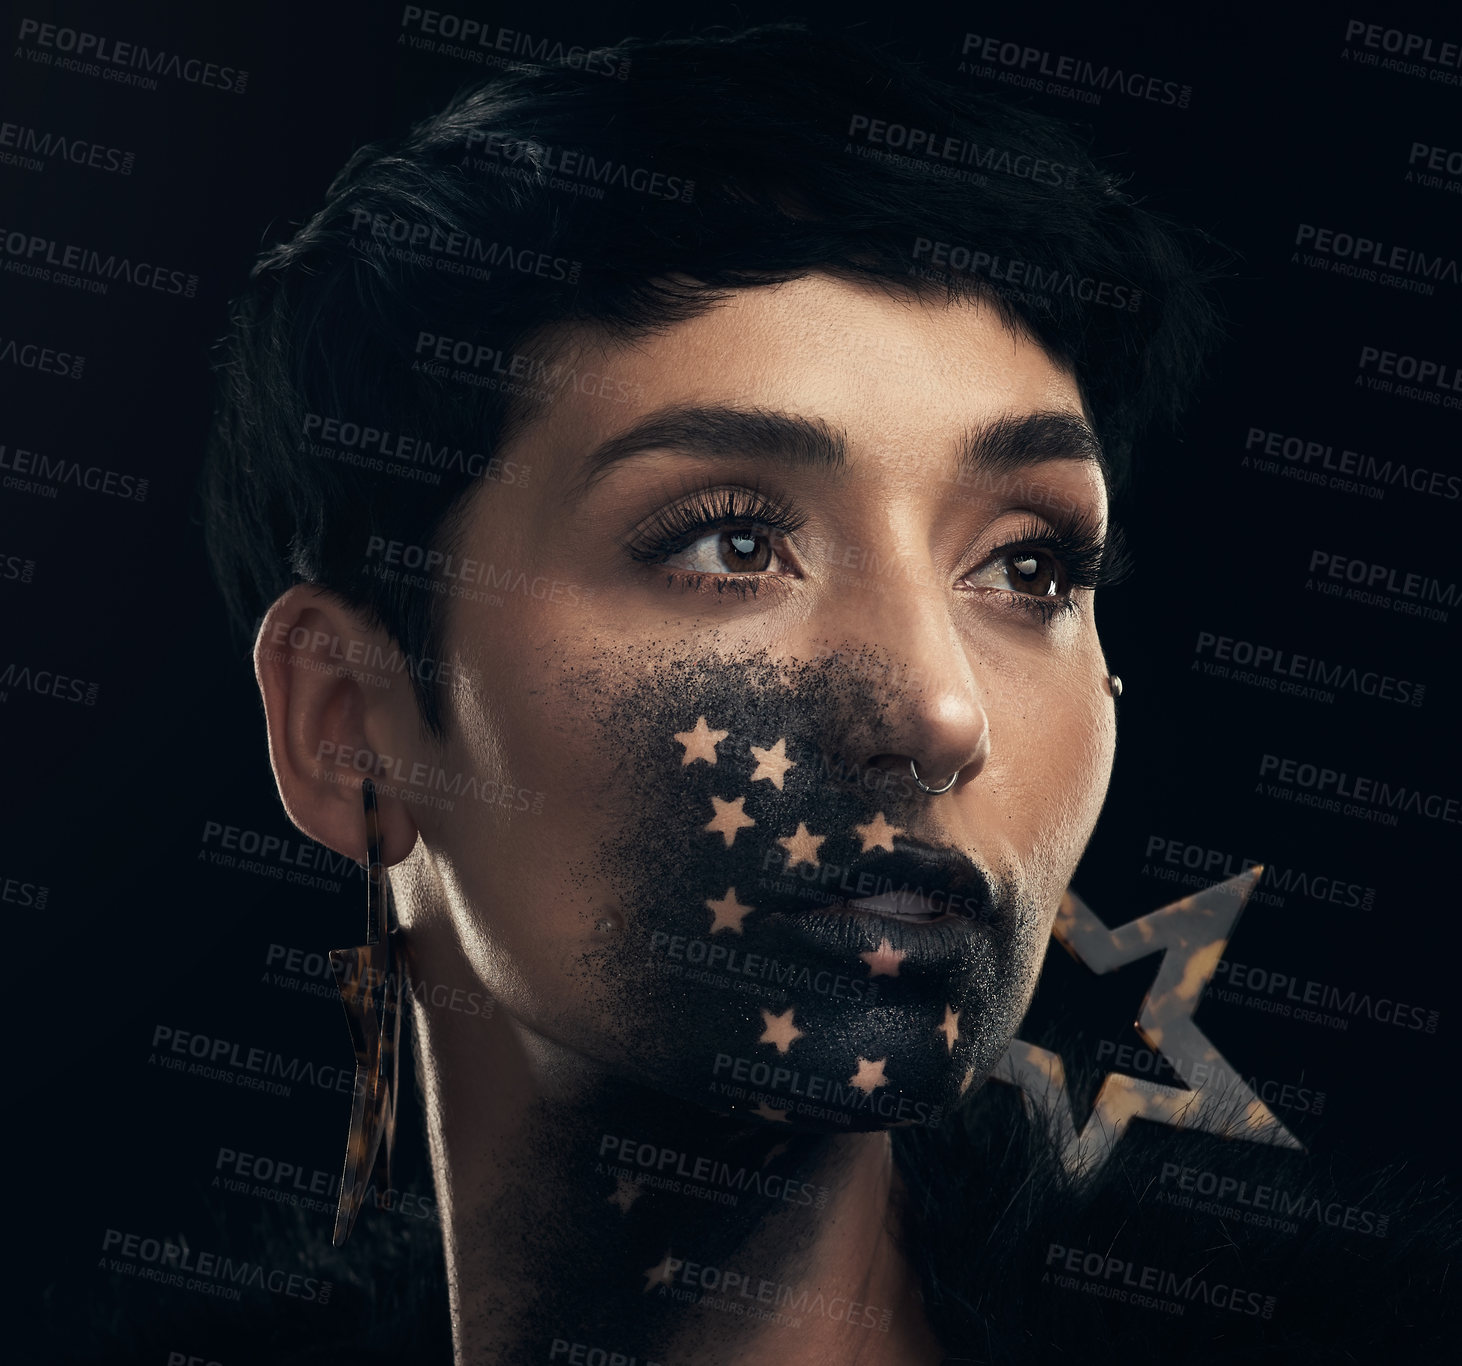 Buy stock photo Studio shot of a young woman posing with paint on her face on a black background